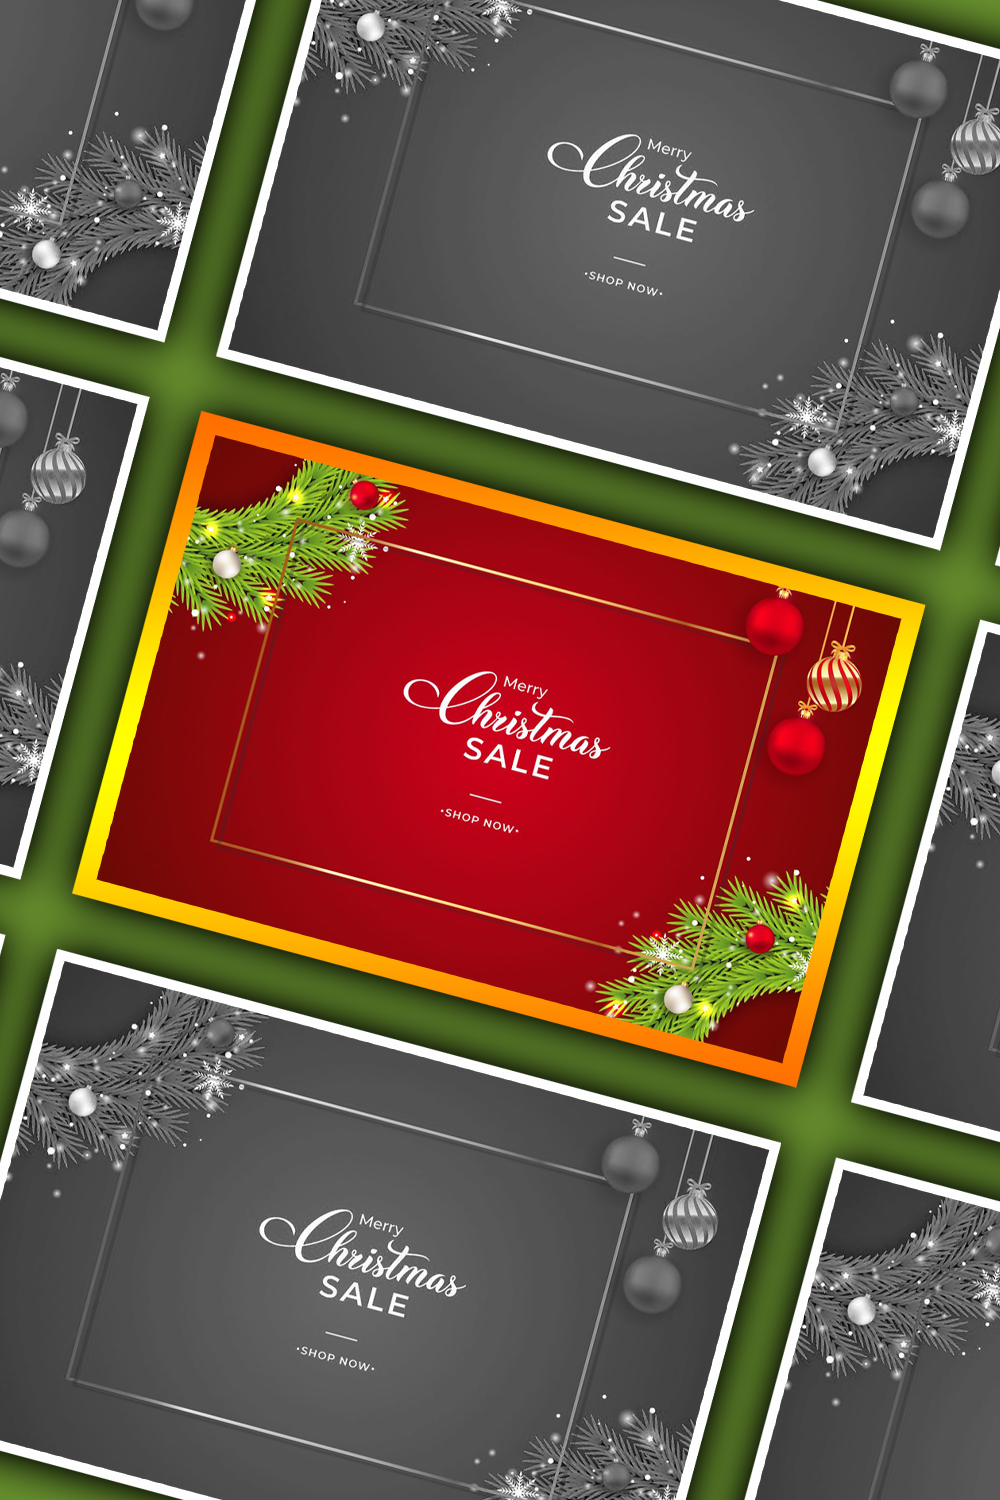 Pinterest illustrations christmas sales banner with red balls.